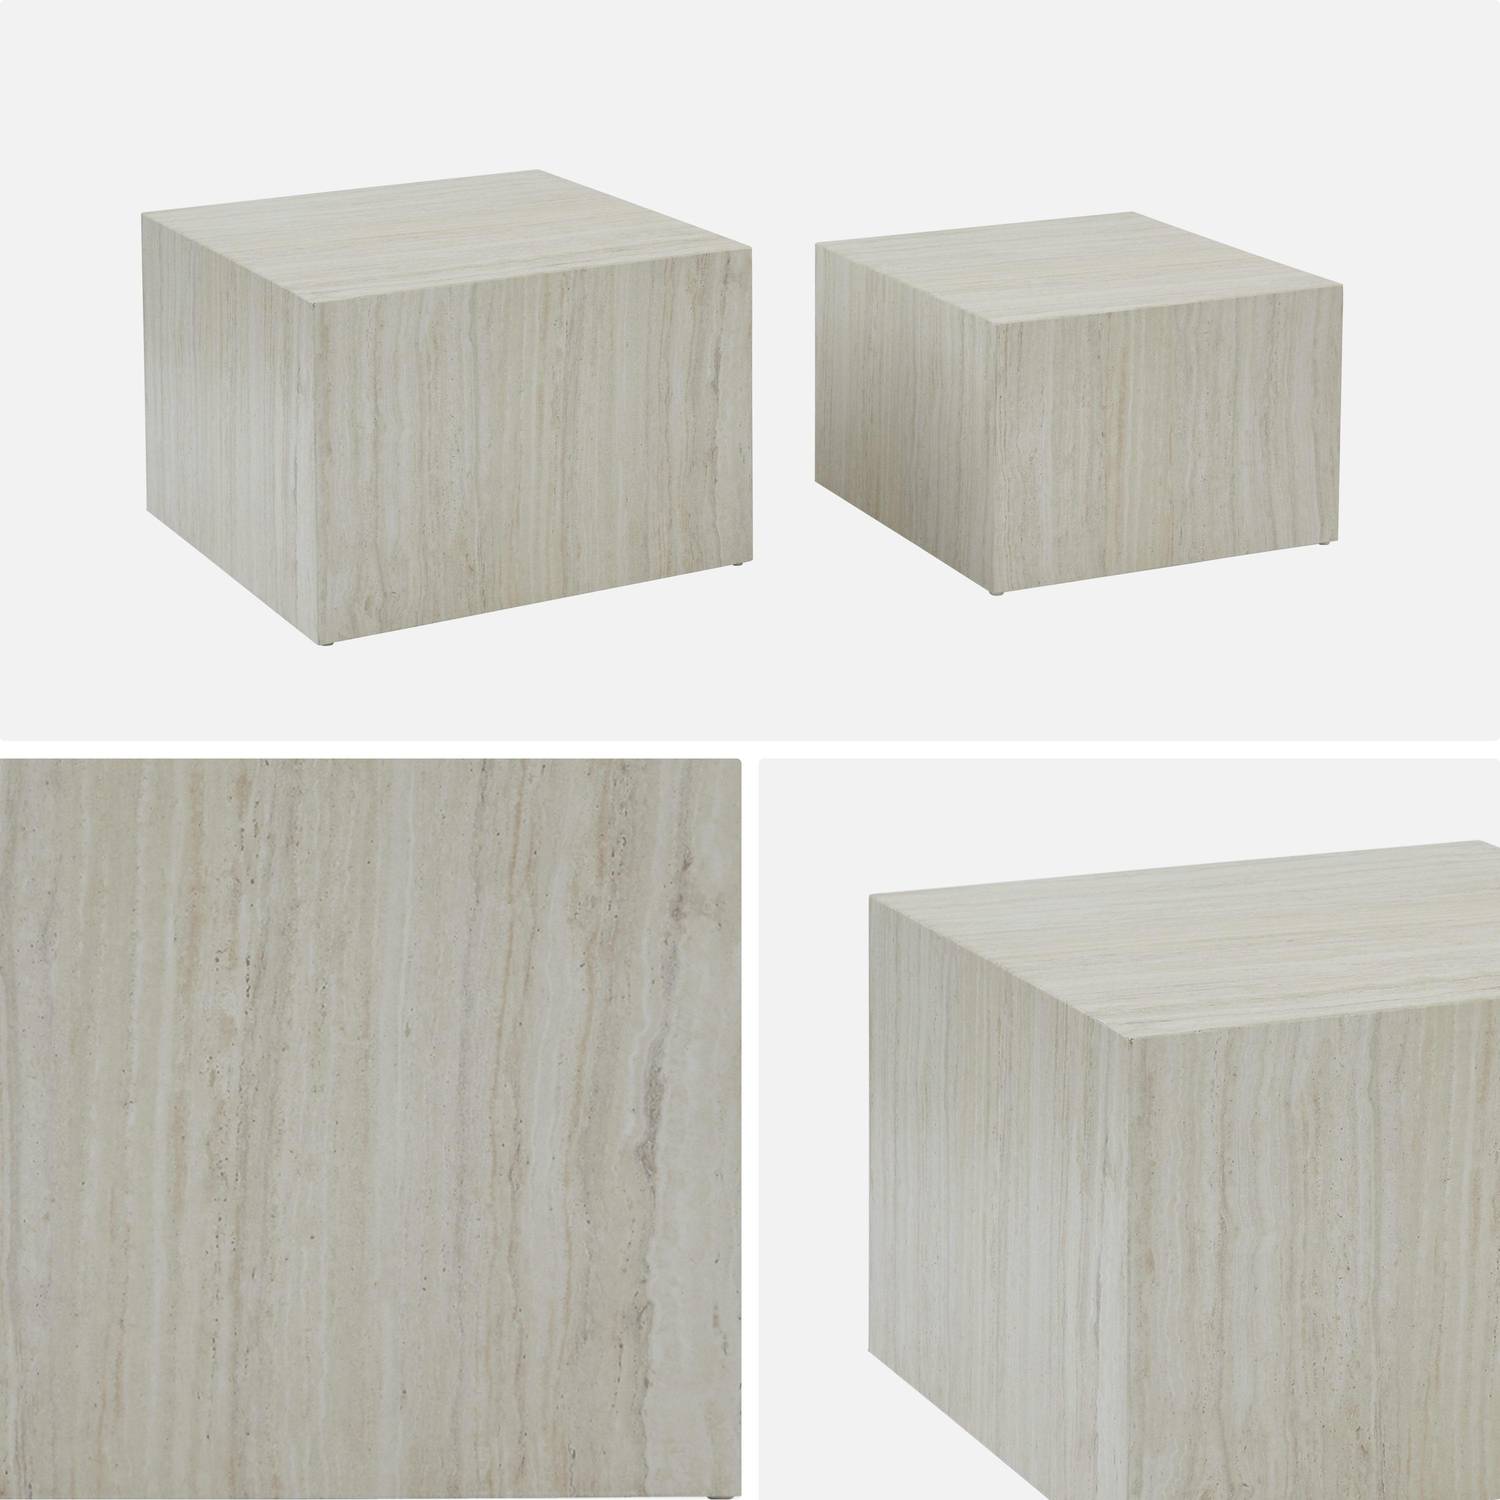 Set of 2 square coffee tables with marble effect, white, L50xW50xH33cm &  L58xW58xH40cm, Paros Photo7